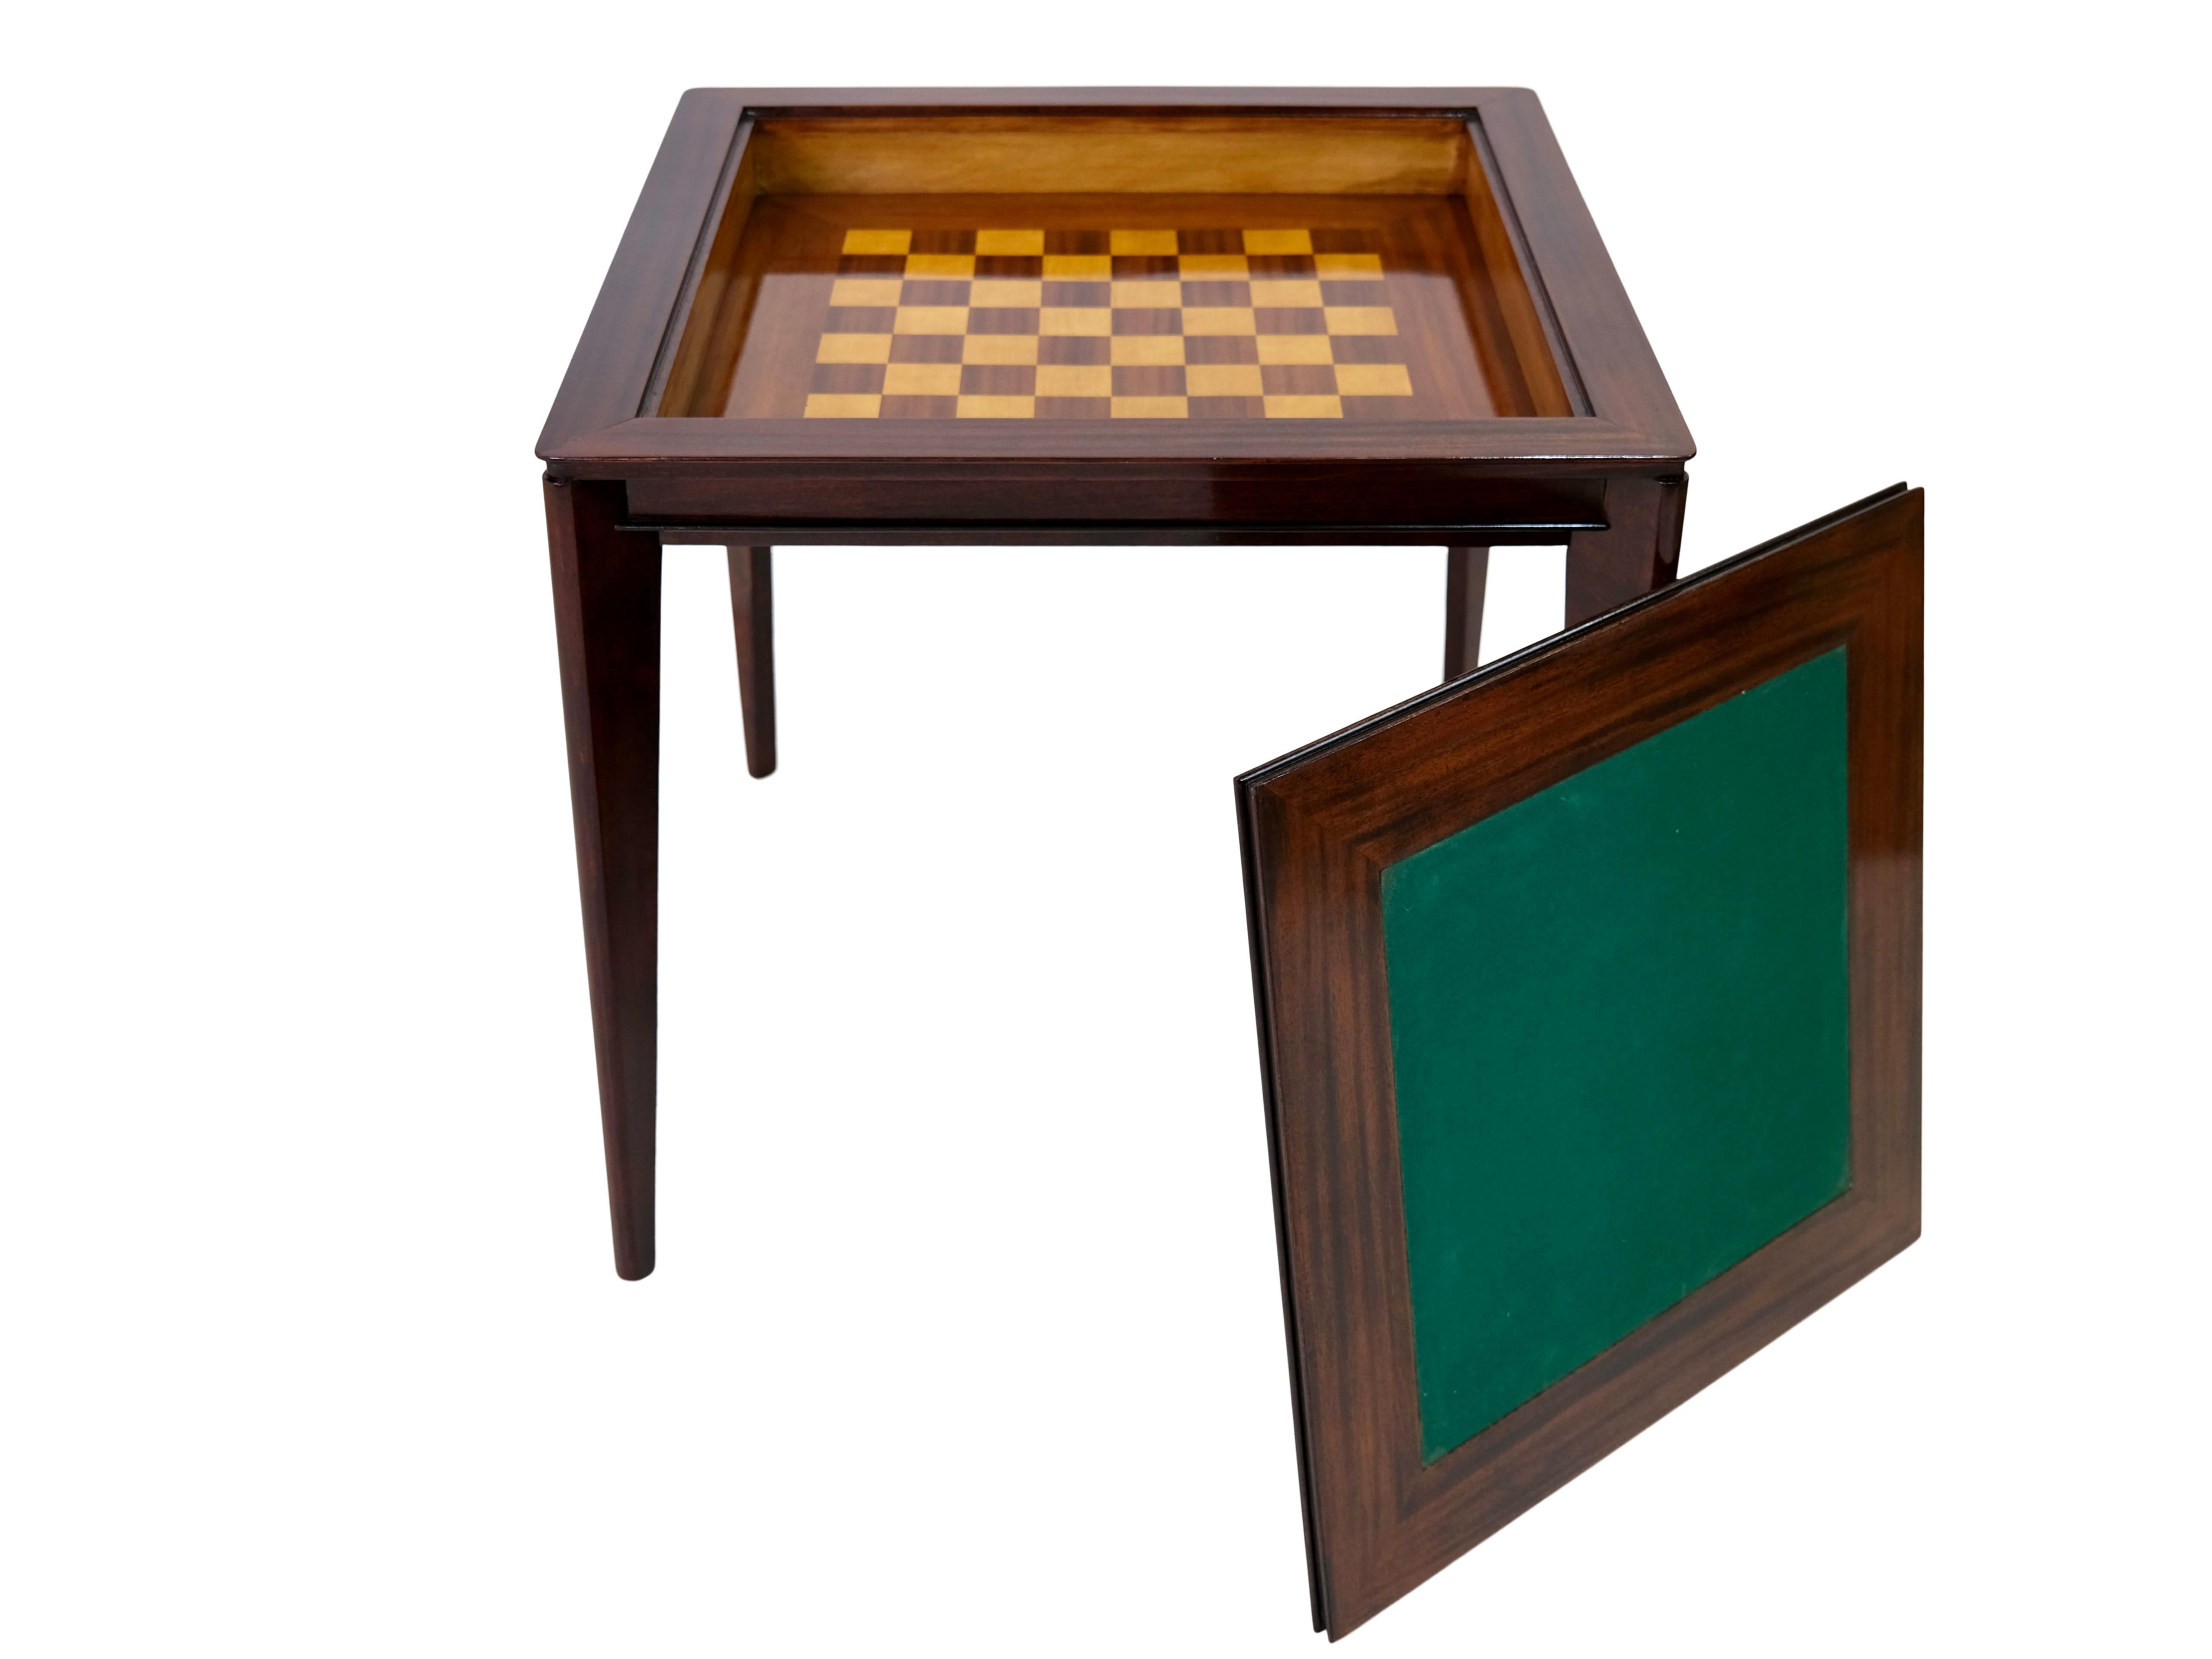 Shellac Hand Polished Art Deco Game Table with Chess Board and Green Felt 1